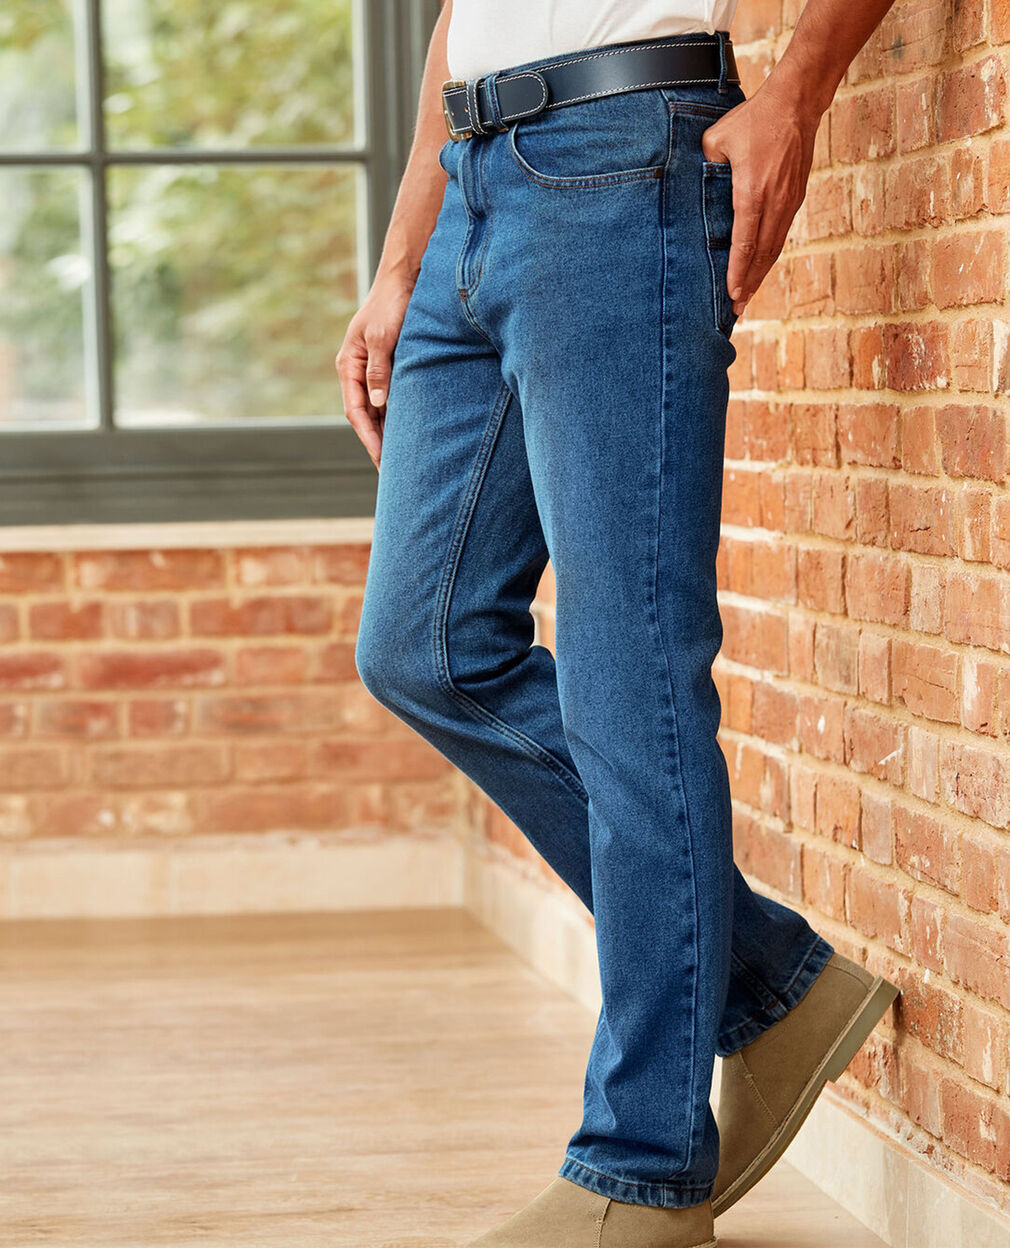 Man wearing a pair of mid-wash blue jeans with a black belt and a white T-shirt tucked in. He is also wearing a pair of brown boots and the backdrop is of a brick wall